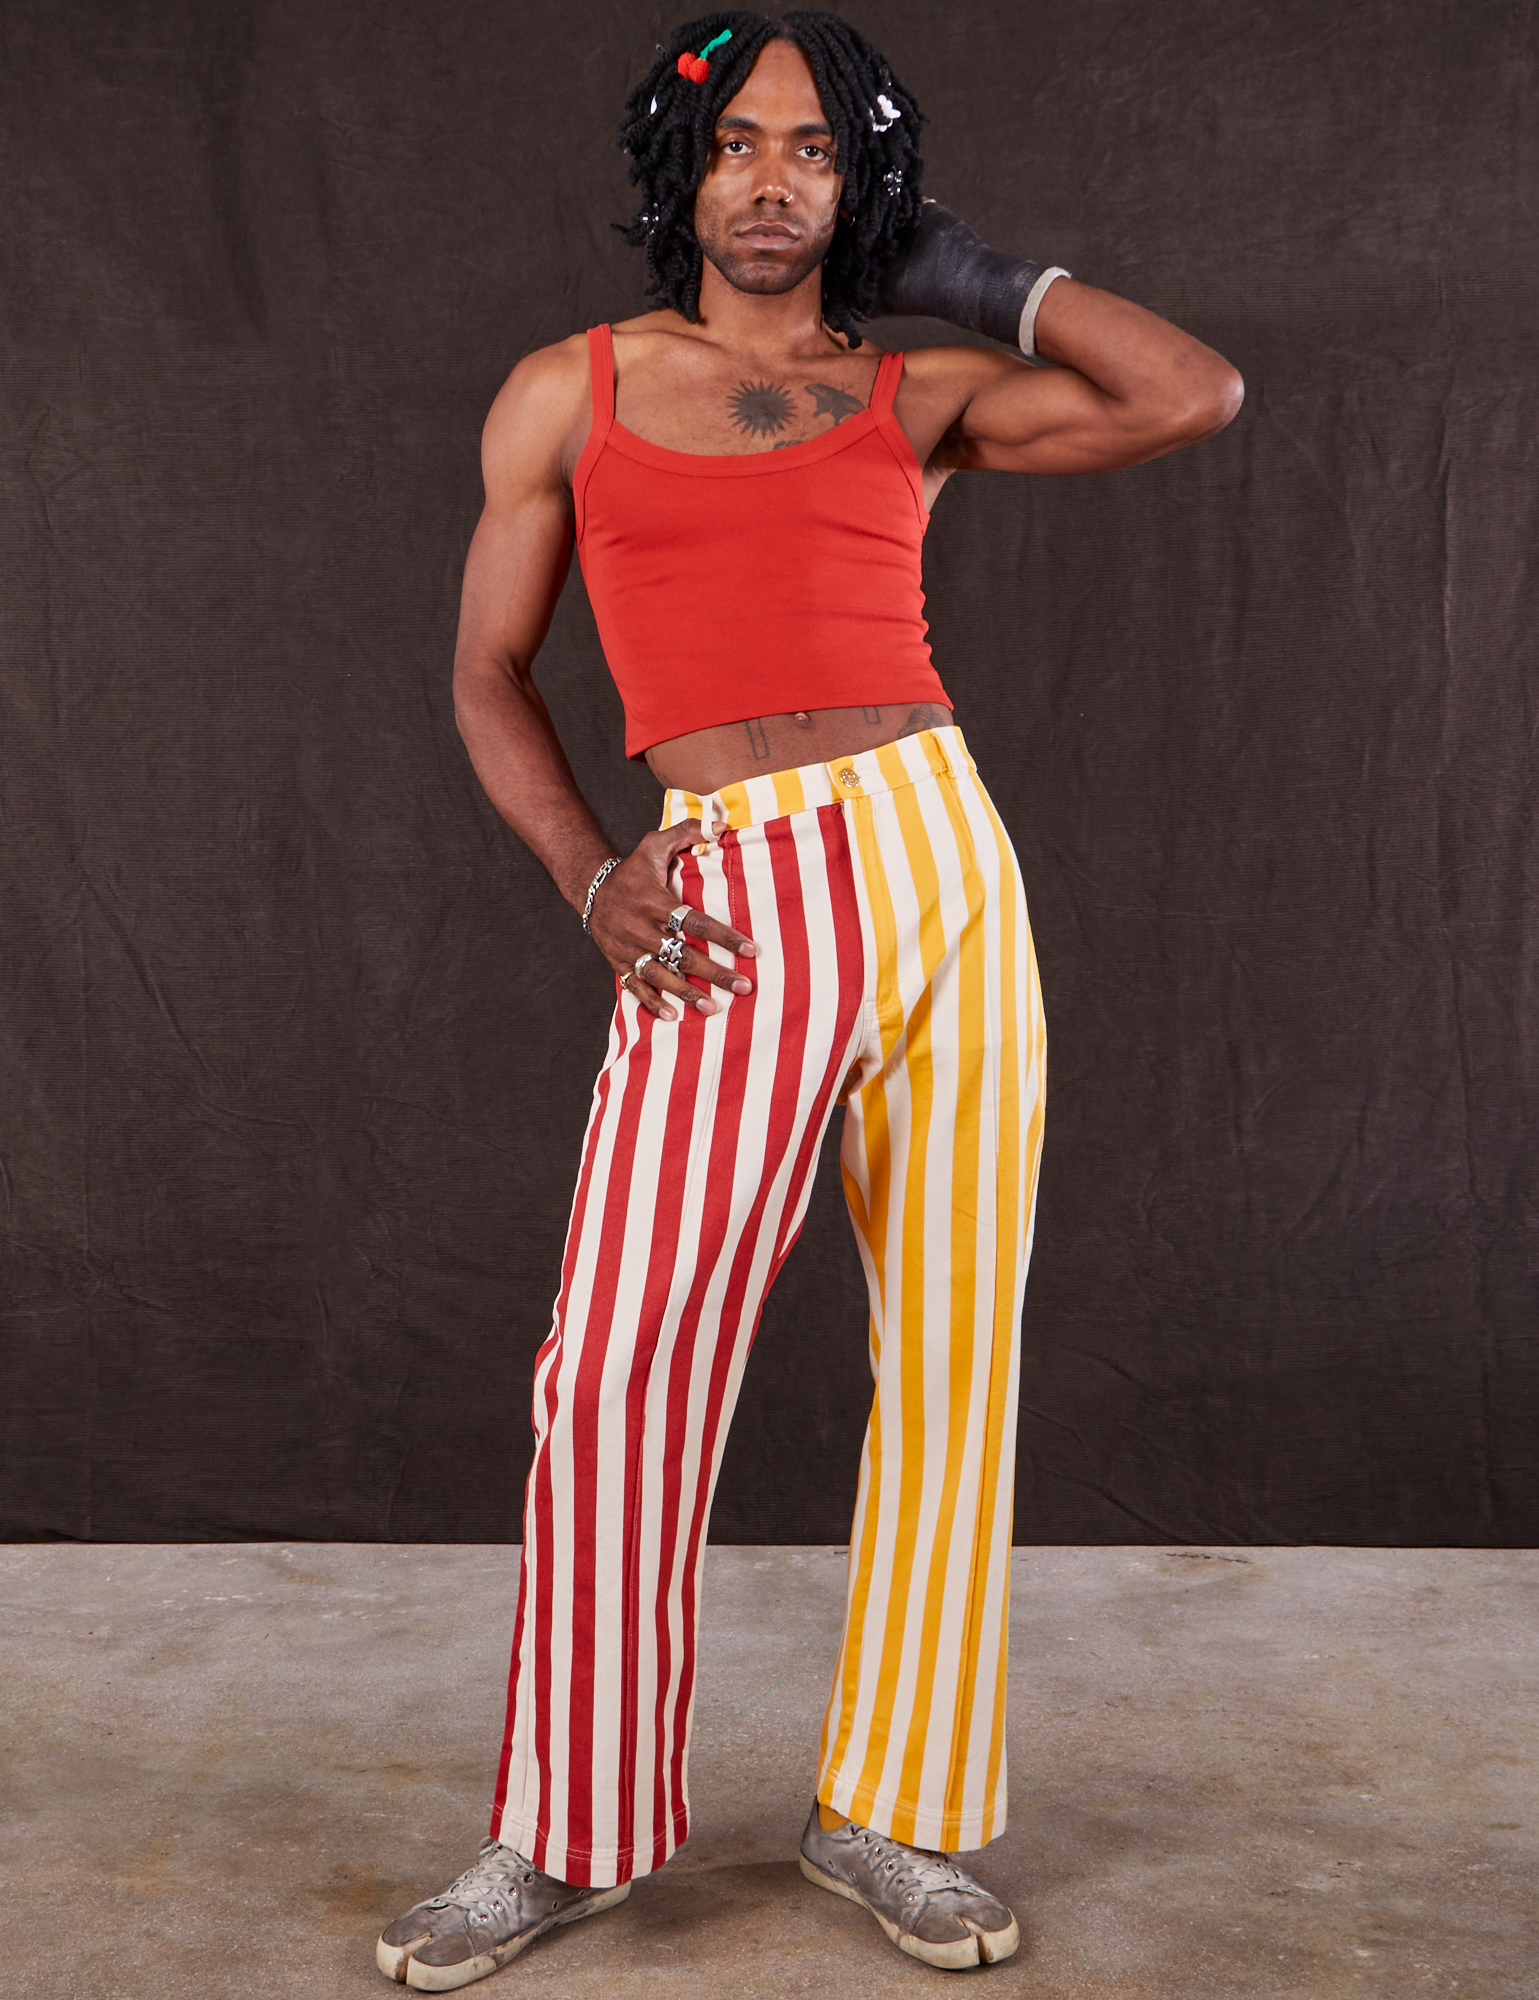 Jerrod is 6&#39;3&quot; and wearing S Western Pants in Ketchup/Mustard Stripes paired with mustang red Cami